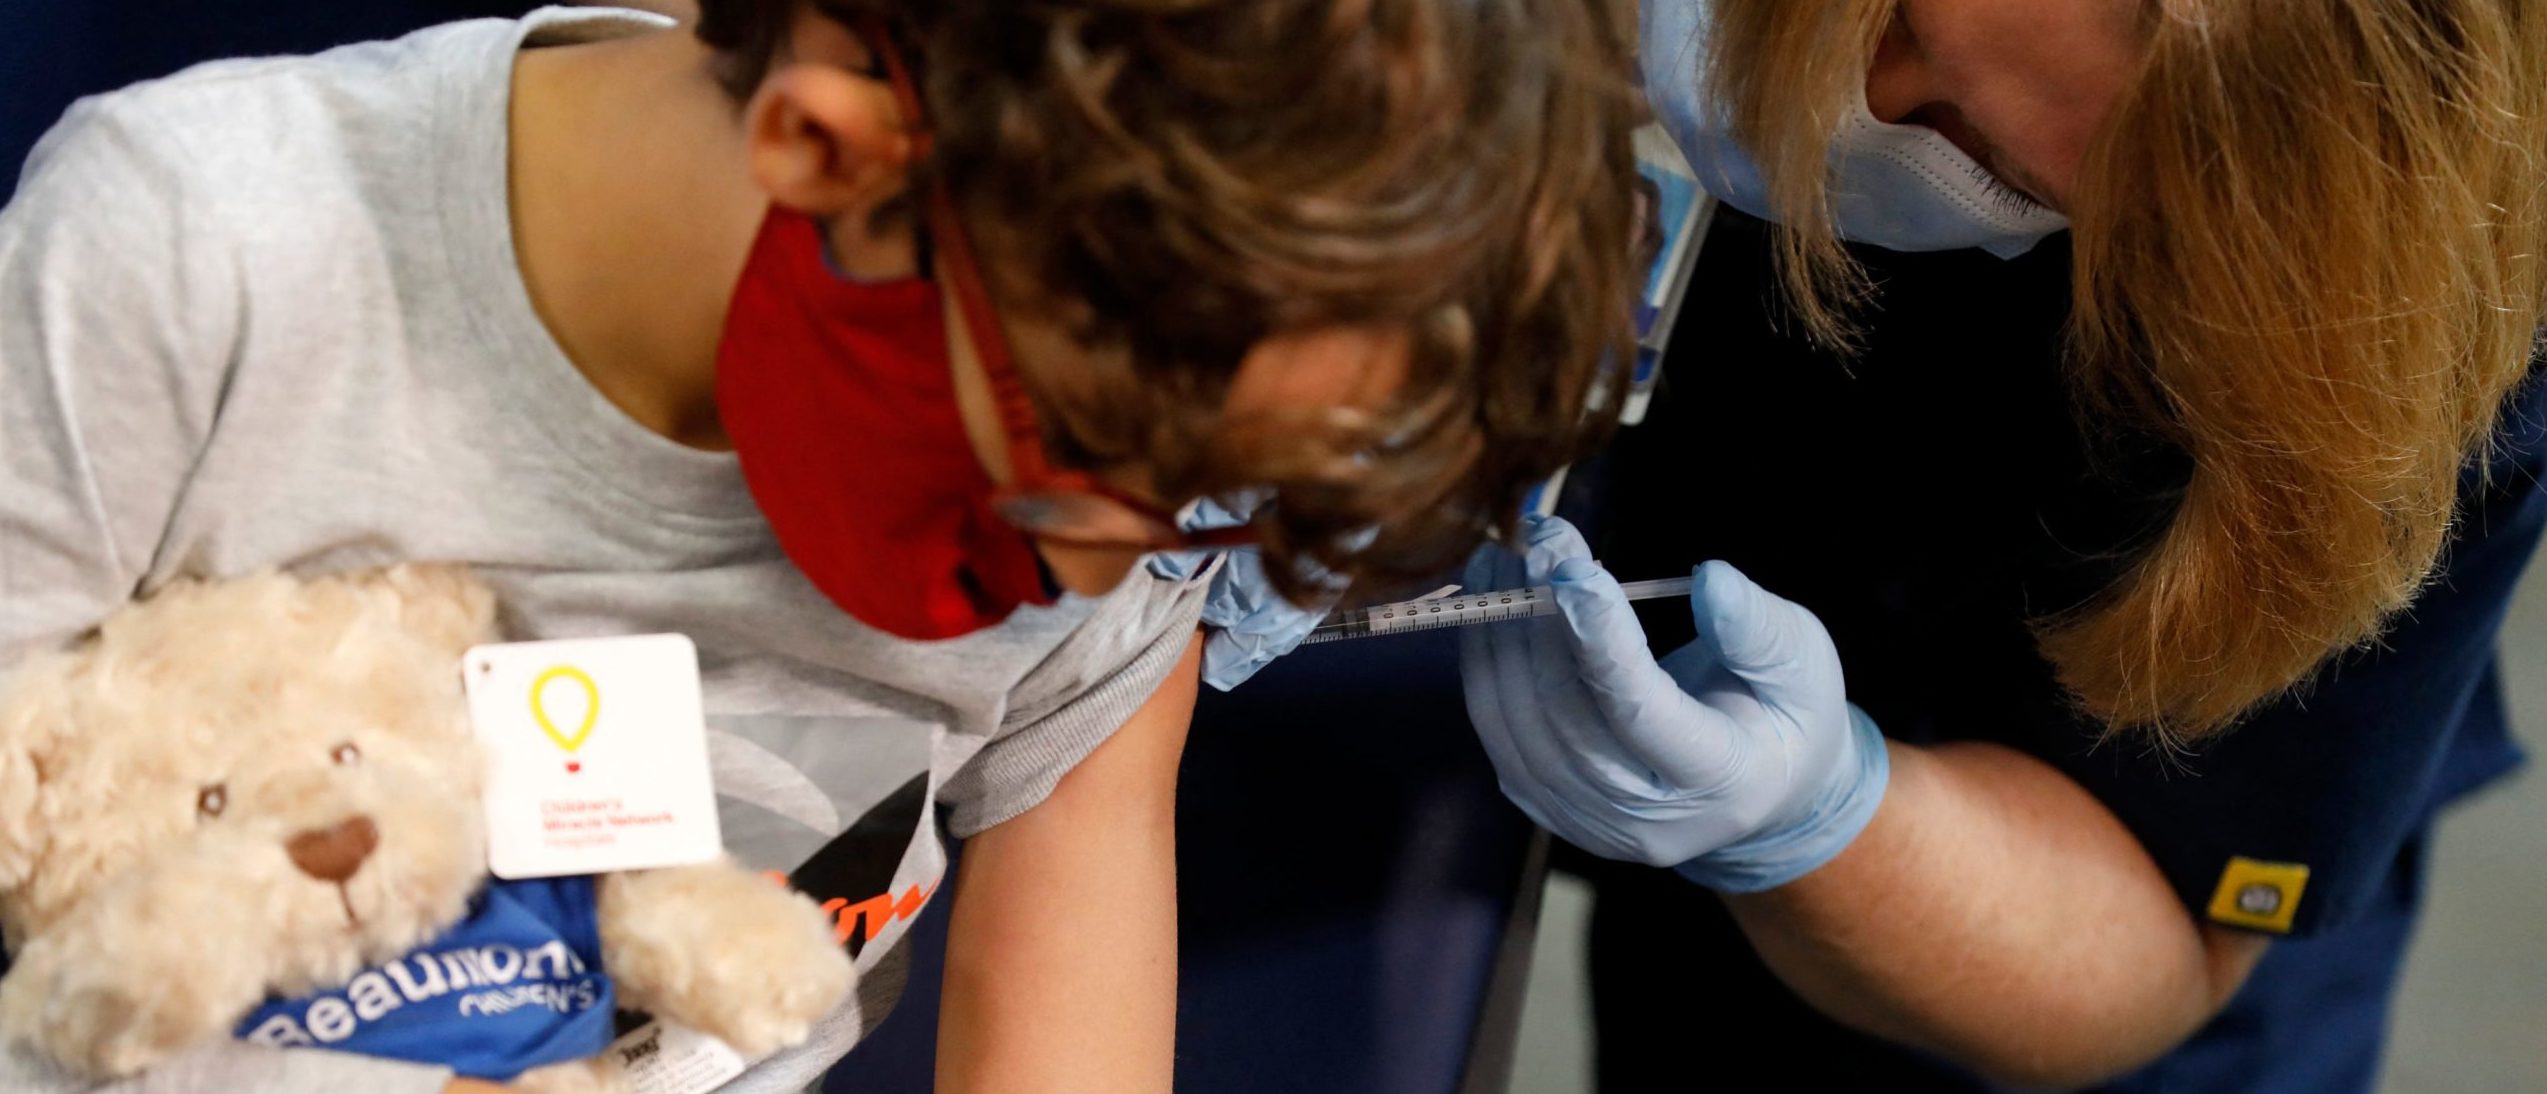 A 7 year-old child receives their first dose of the Pfizer Covid-19 vaccine at the Beaumont Health offices in Southfield, Michigan on November 5, 2021. (Photo by JEFF KOWALSKY / AFP) (Photo by JEFF KOWALSKY/AFP via Getty Images)